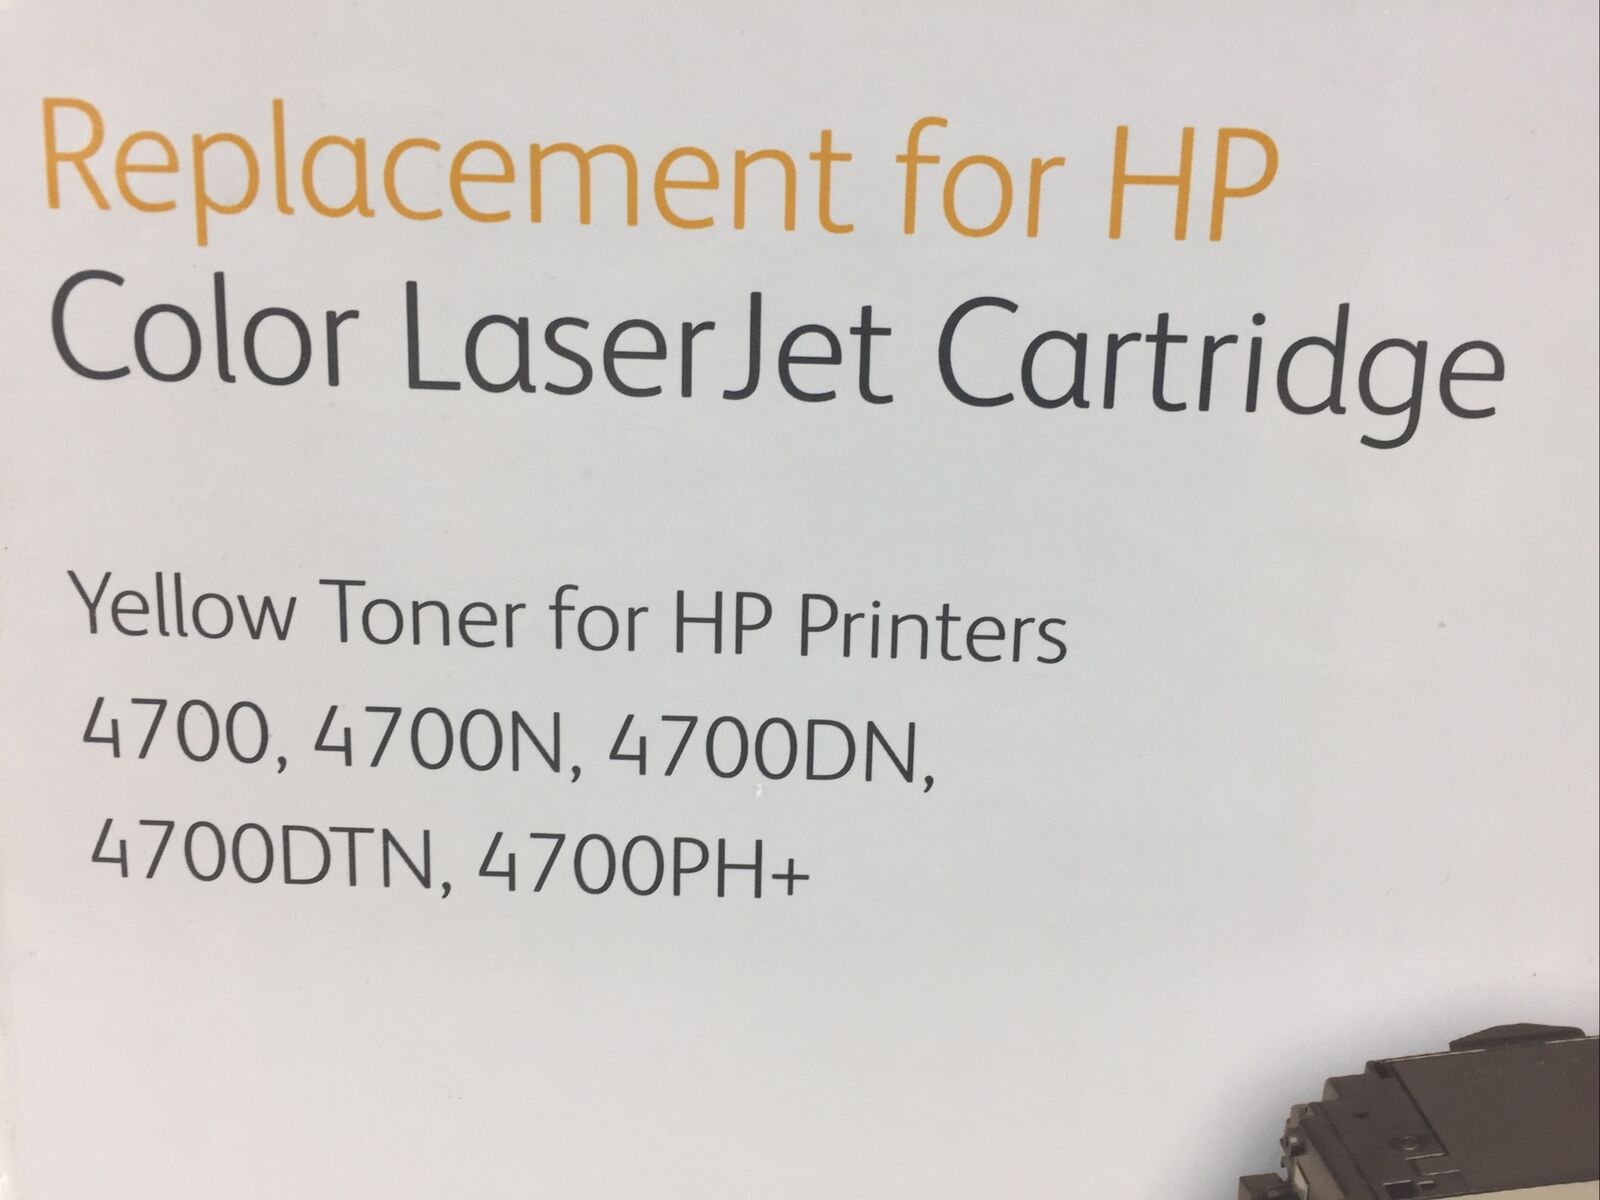 Xerox Replacement Yellow Toner Cartridge for HP 4700  Q5952A  13,100 page yield